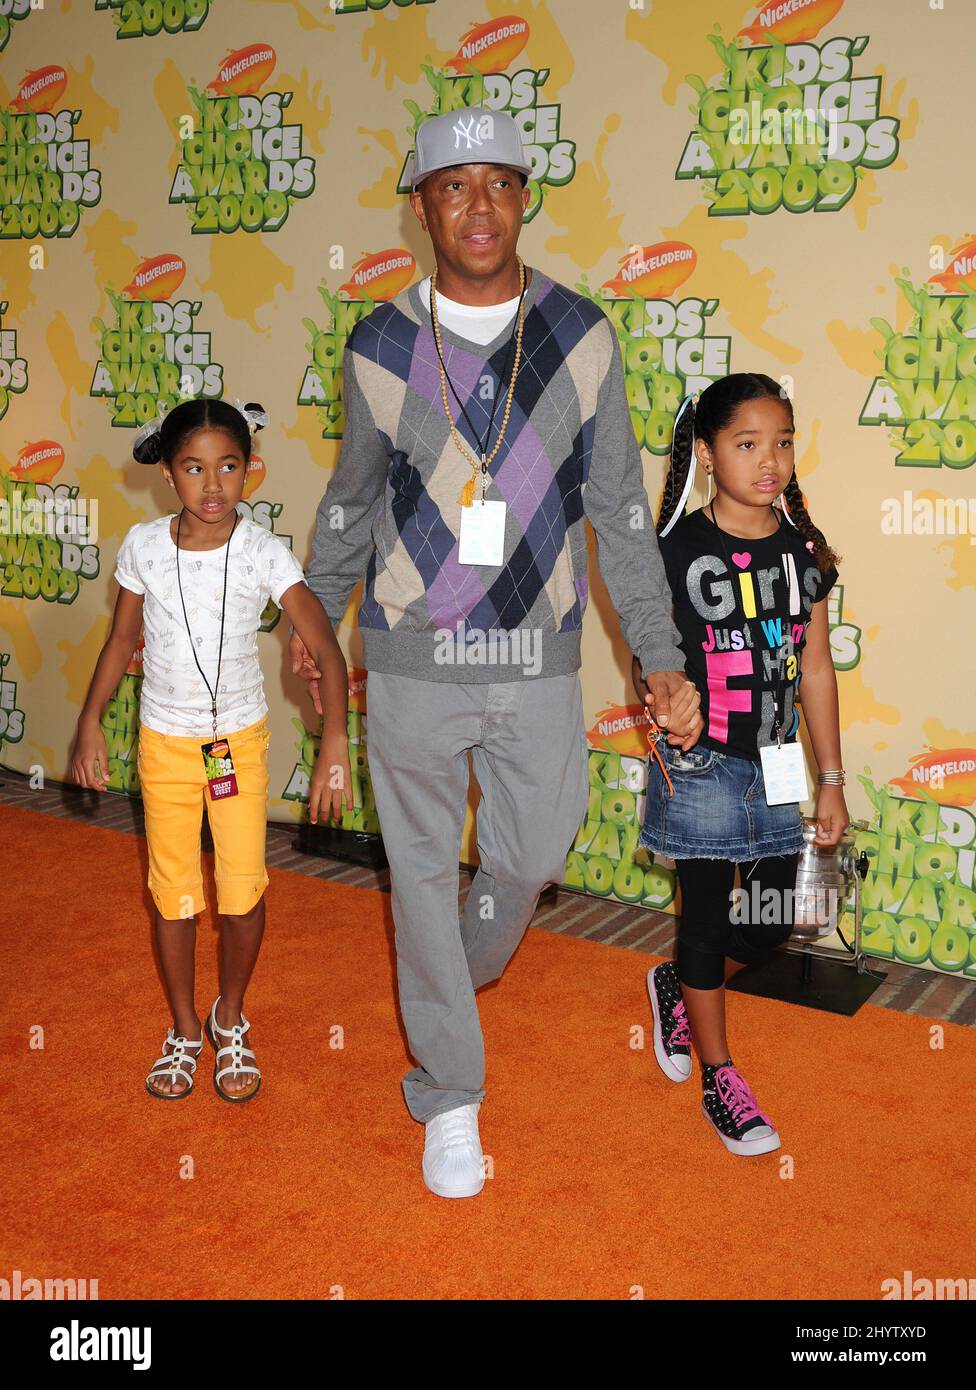 Aoki Lee Simmons, Russell Simmons and Ming Lee Simmons at Nickelodeon's 22nd Annual Kids Choice Awards held at UCLA's Pauley Pavilion, Westwood. Stock Photo